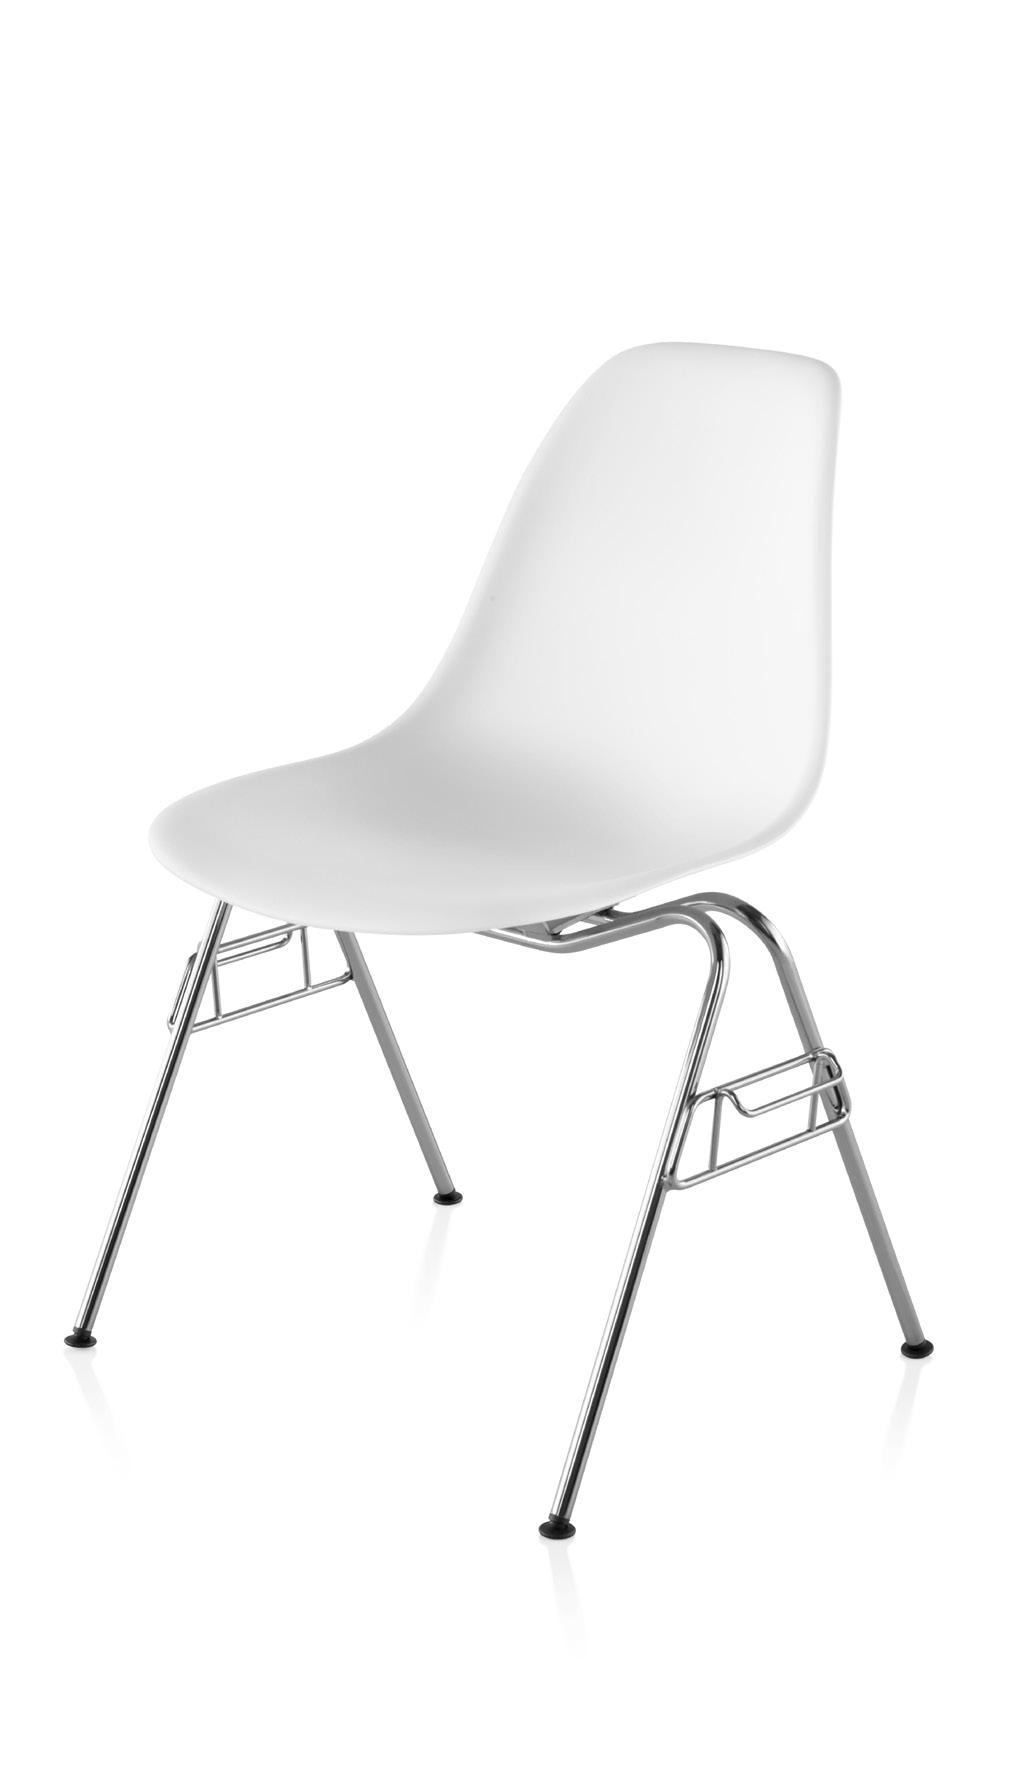 Eames Molded Plastic Side Chair Stacking / Ganging Base 19% recycled content; 100% recyclable The Eames molded plastic side chair exemplifies the designers mantra of the best for the most for the